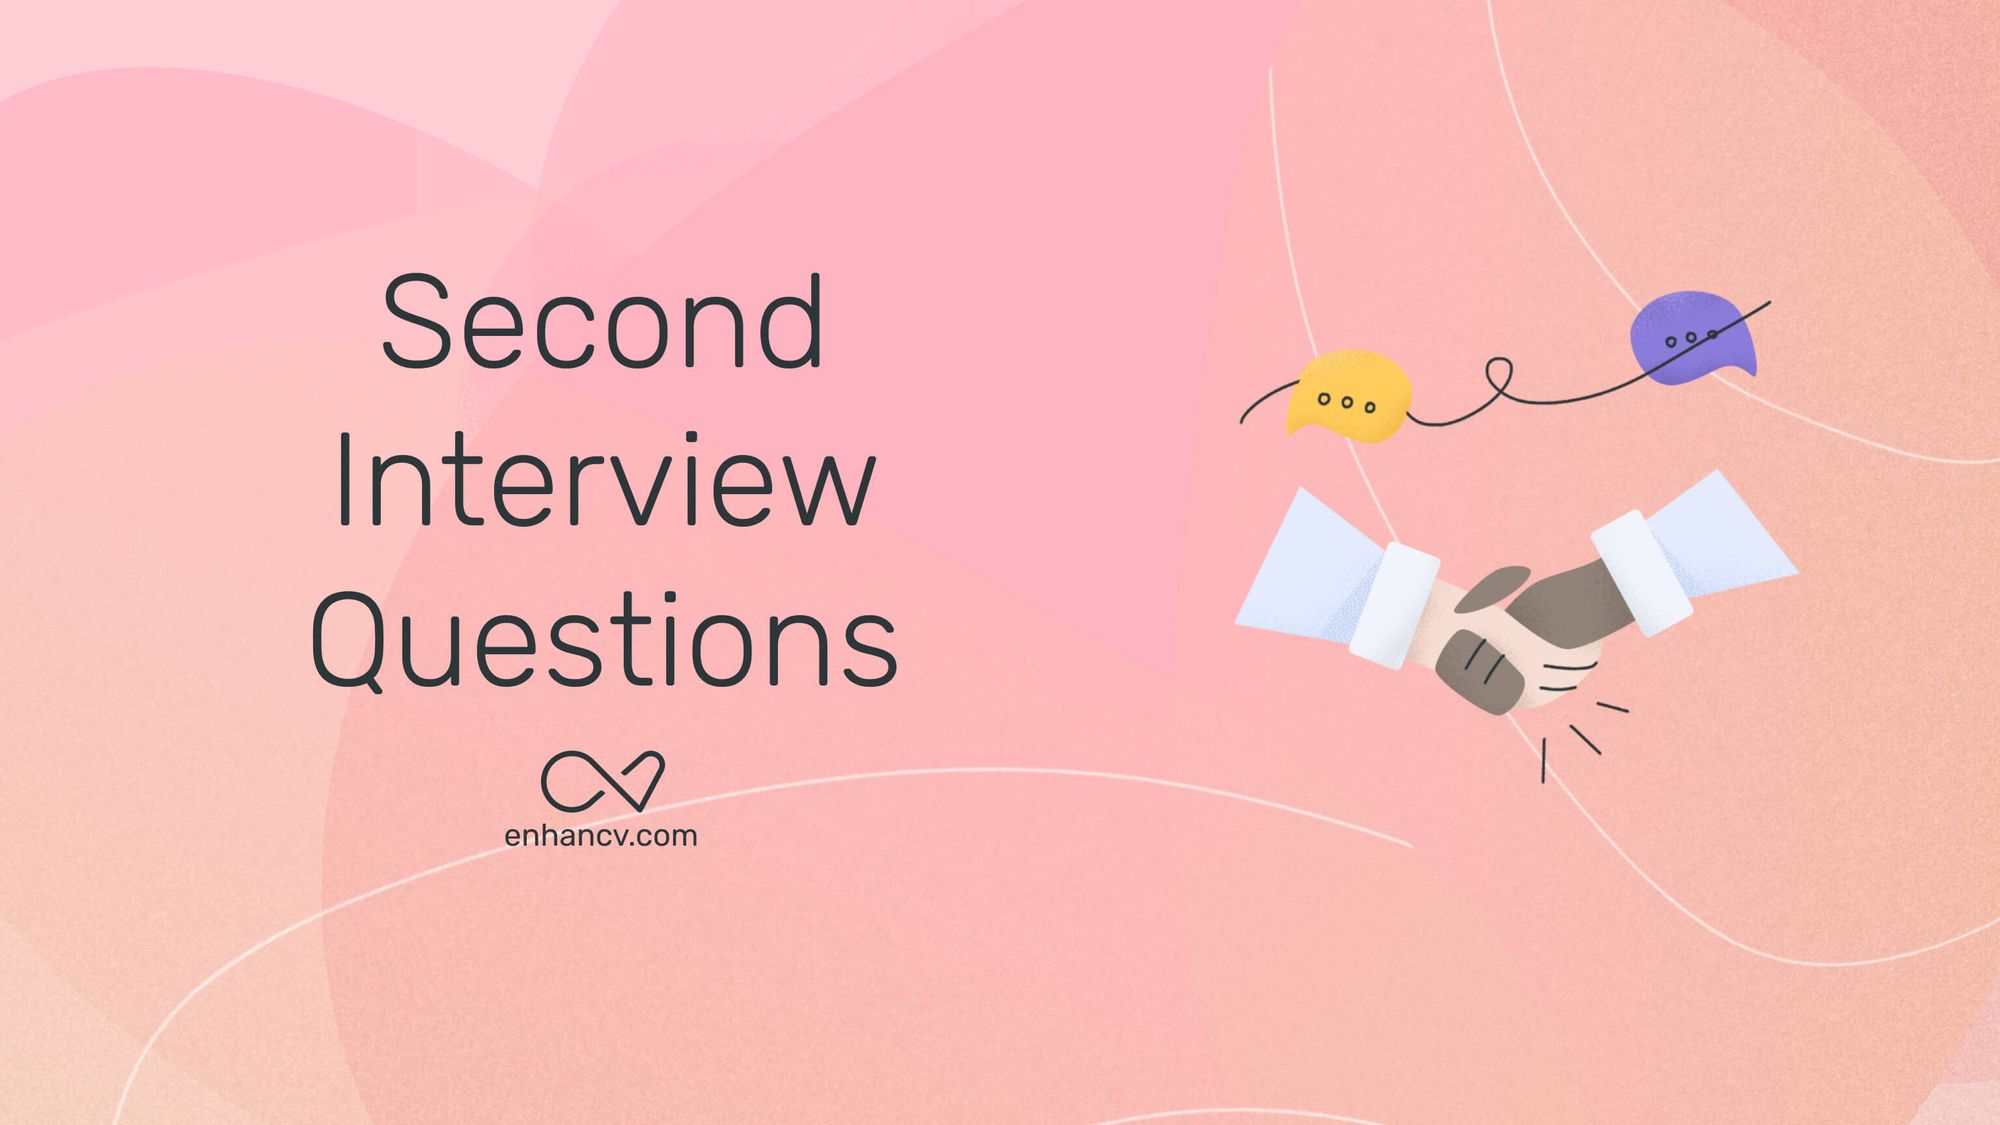 8 Common Questions for a Second Interview (With Answers)